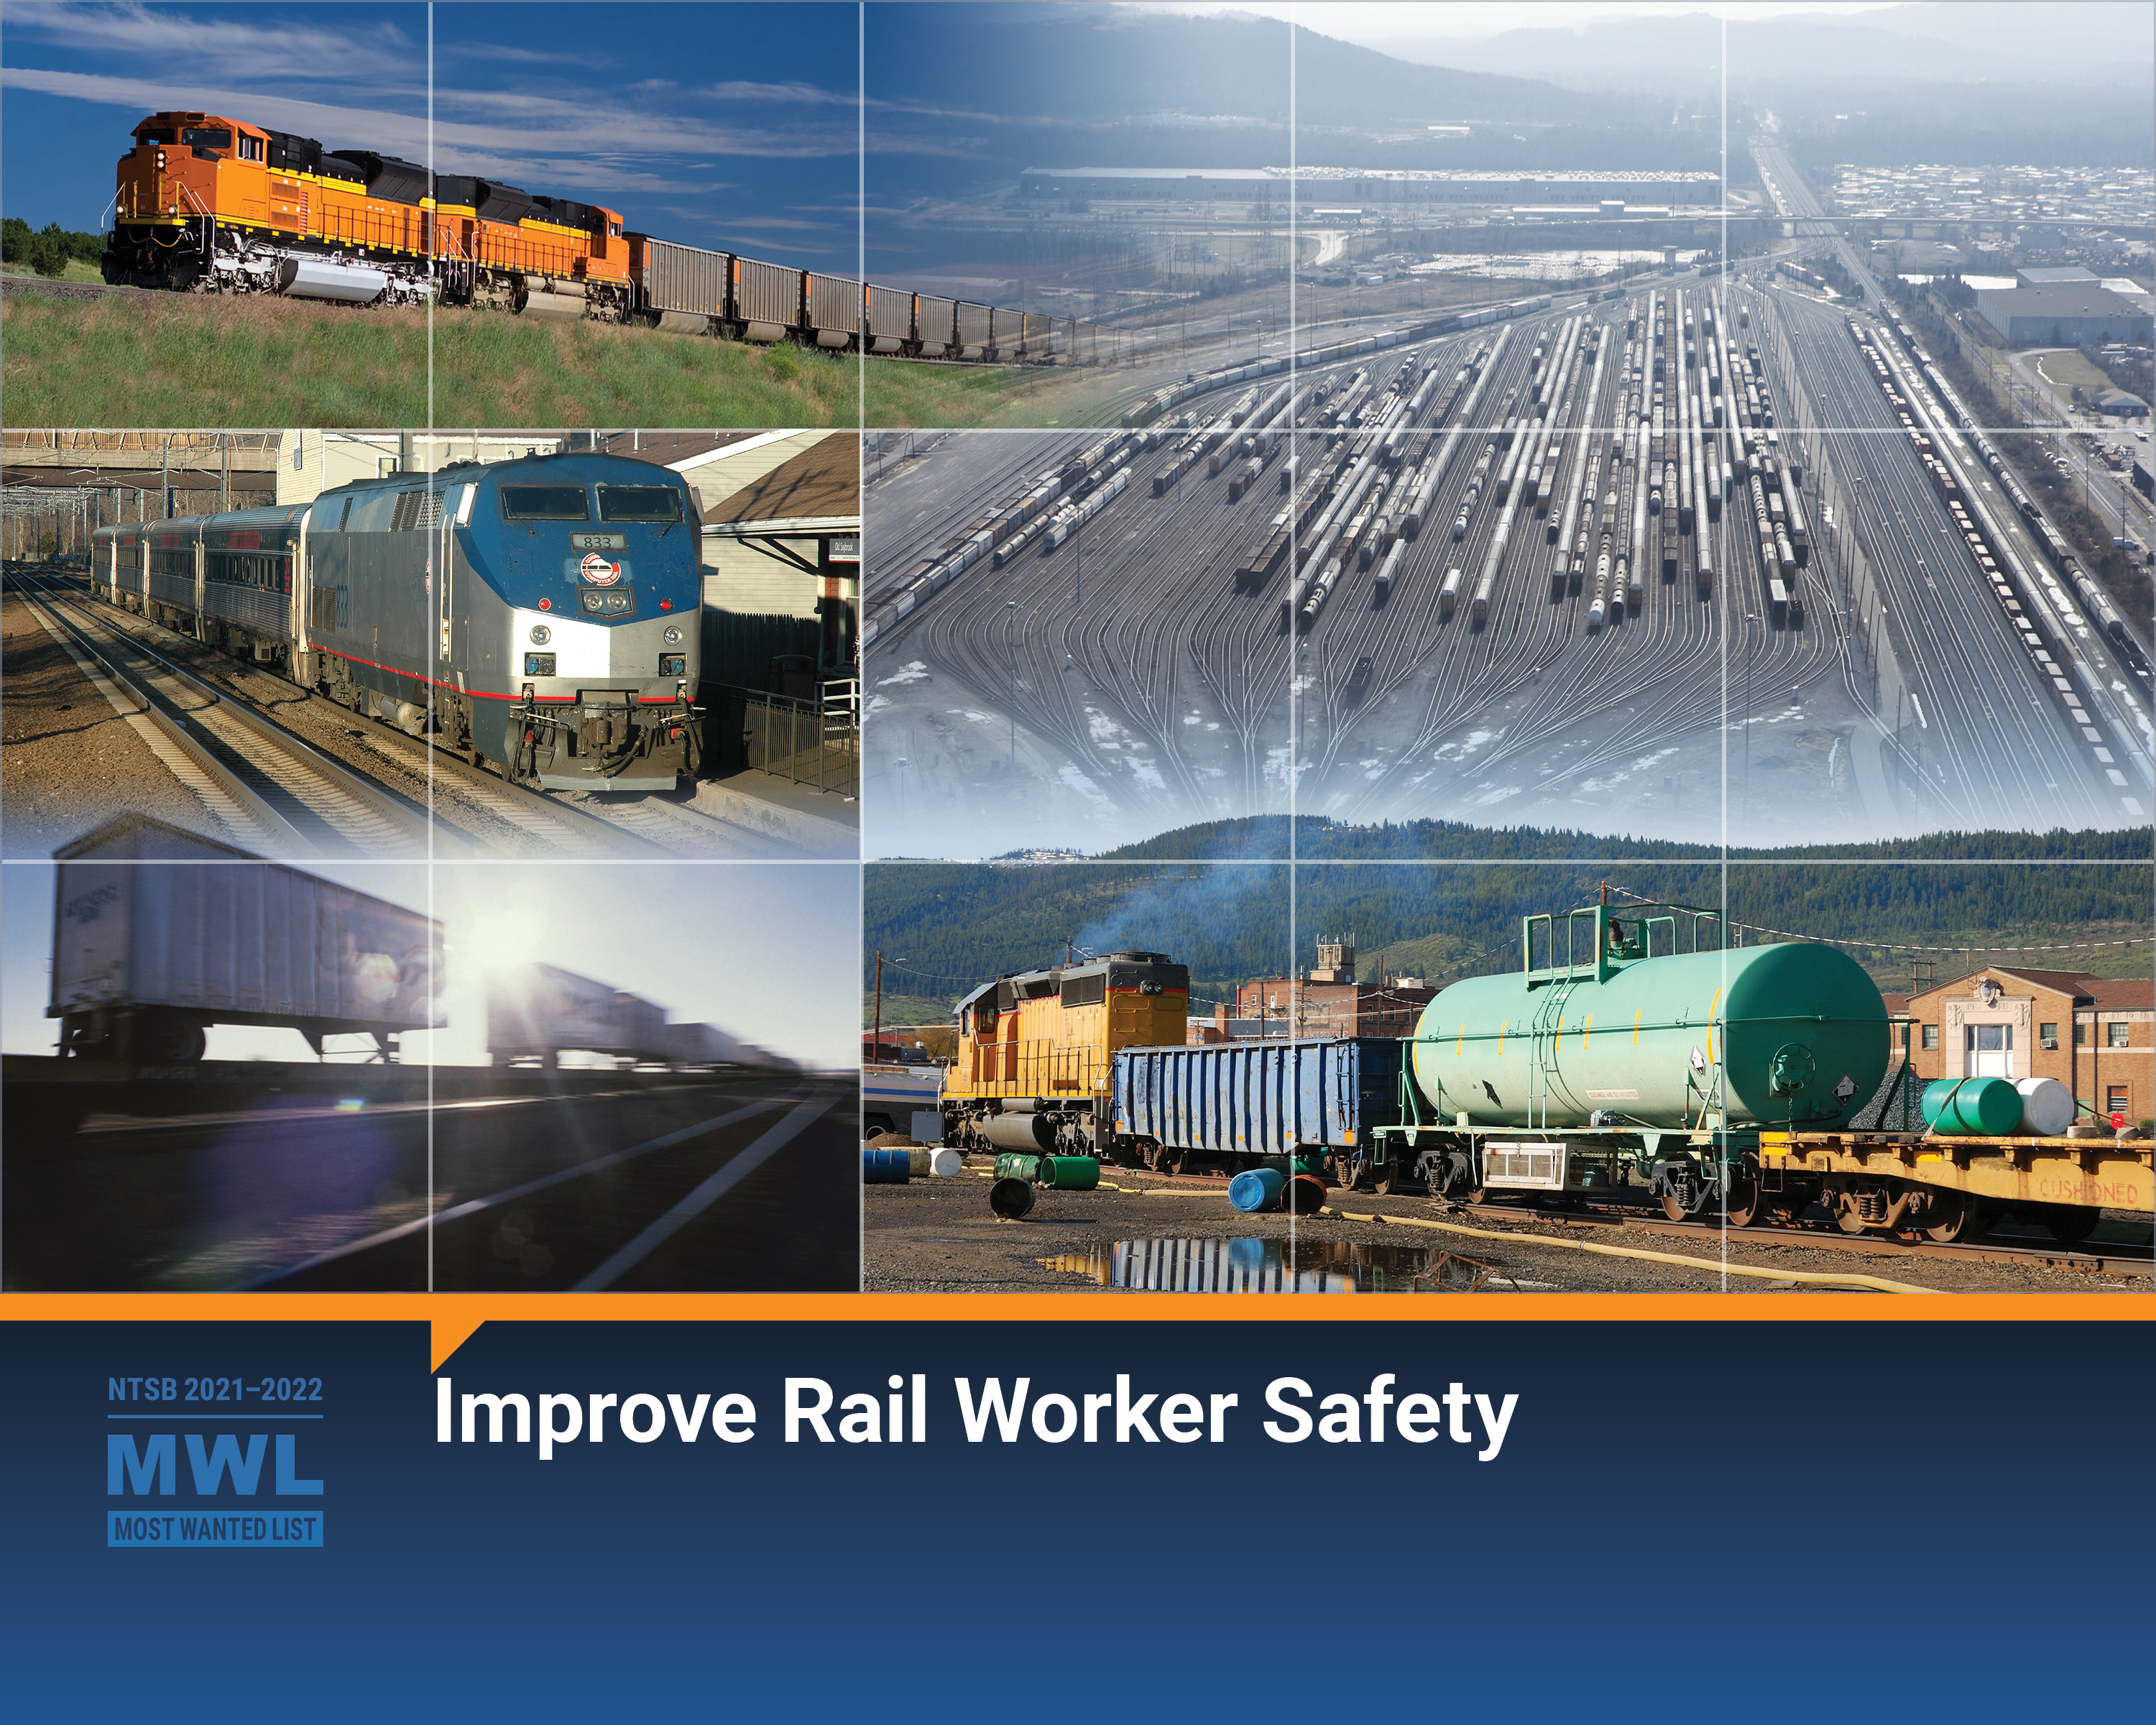 NTSB Closes Recommendations on Preventing Rail Worker Fatalities